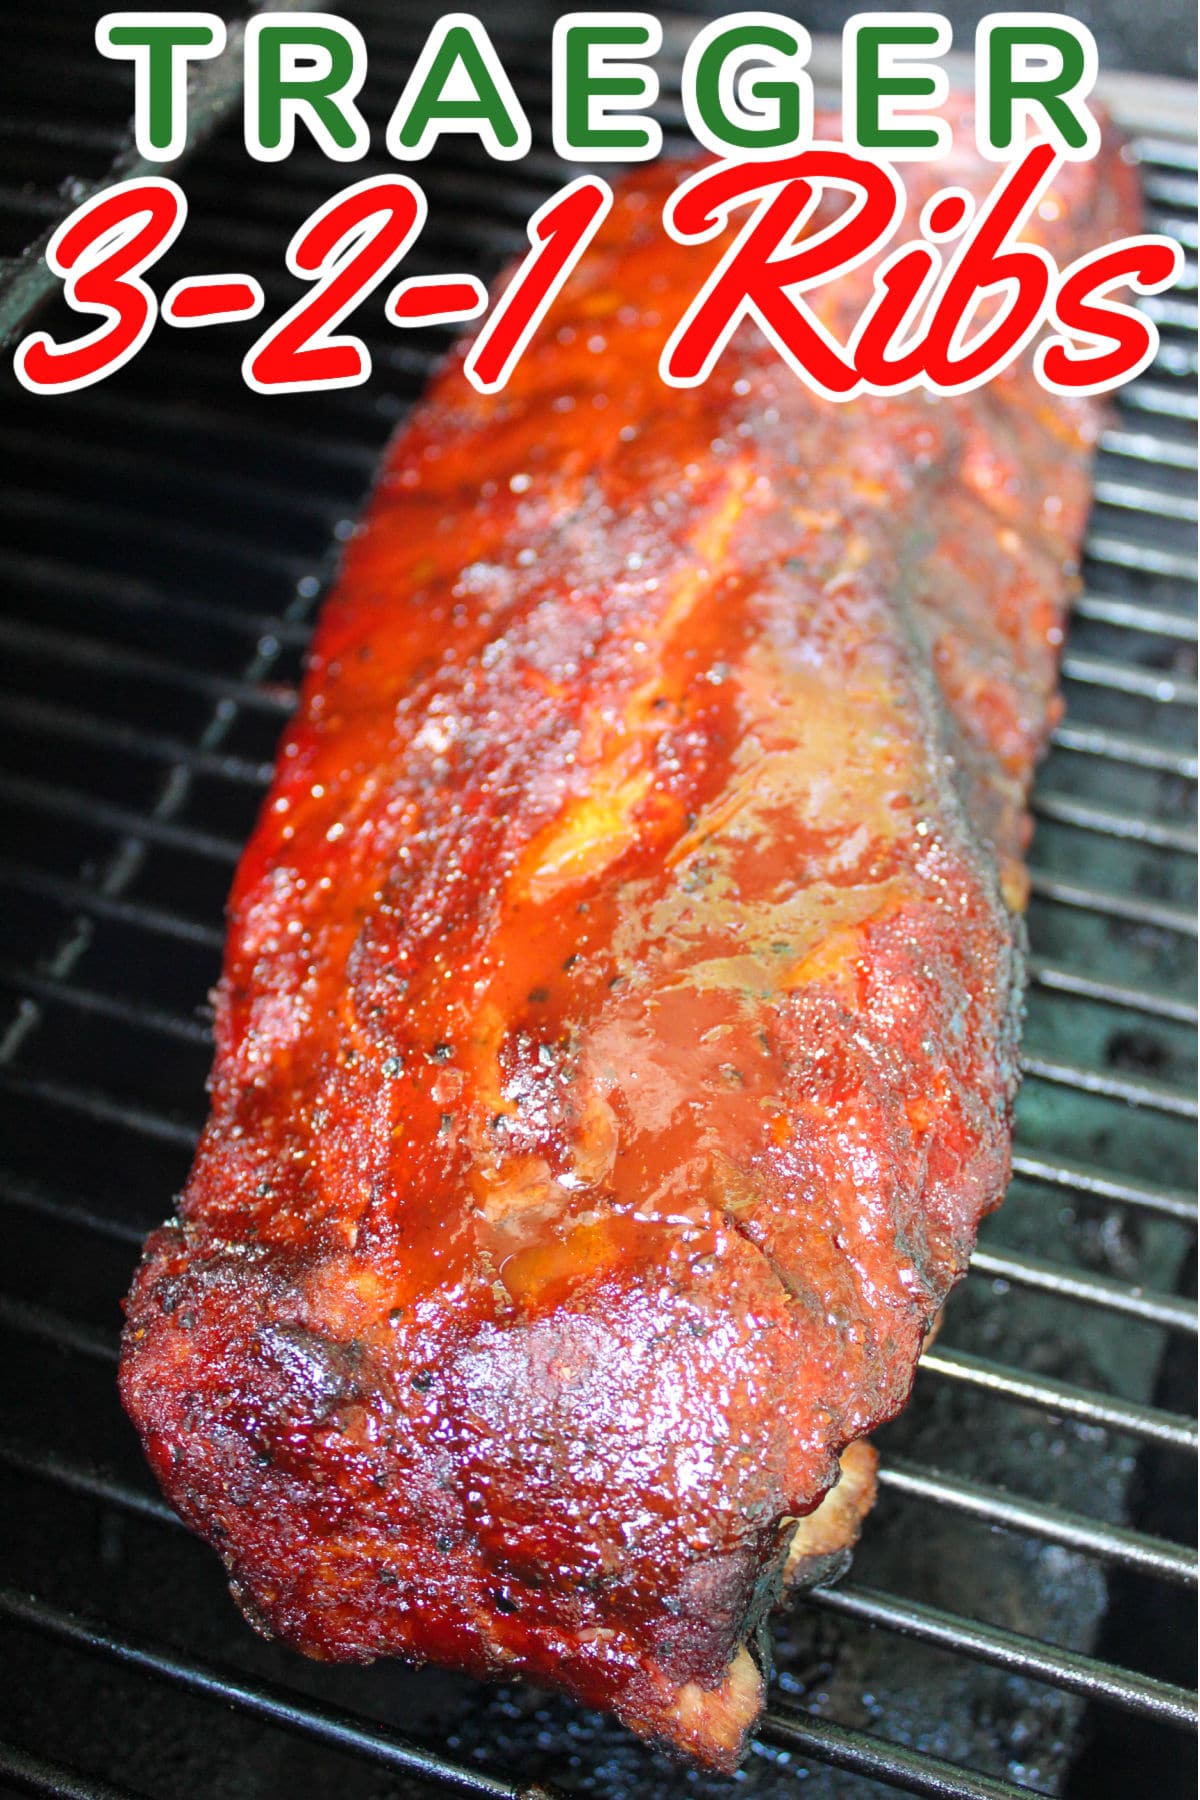 Traeger 3-2-1 Ribs are so freakin simple!!!! Like - why did I not make these 2 years ago when I got my Traeger???? And all you need is a rub, a little sauce and a little juice (or soda - or beer - just open the fridge). And don't worry -they're delicious too!!! via @foodhussy